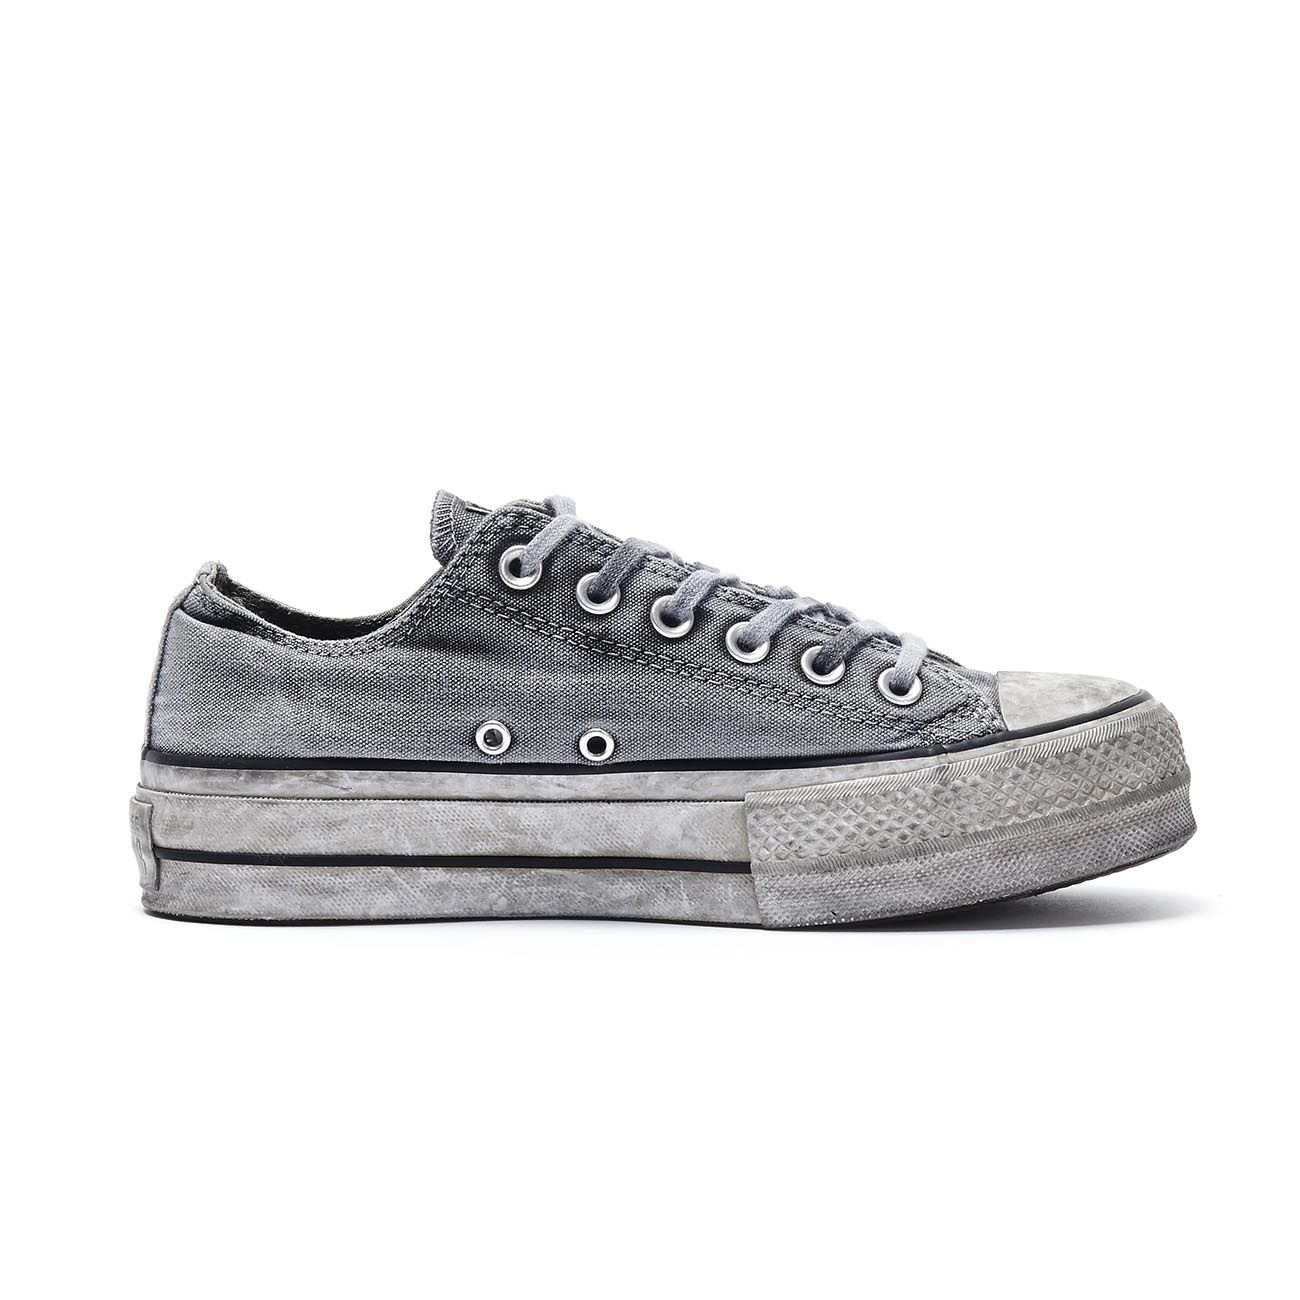 CONVERSE CHUCK TAYLOR ALL STAR OX LIFT SNEAKERS CANVAS LTD Woman ... بالطو طبيب